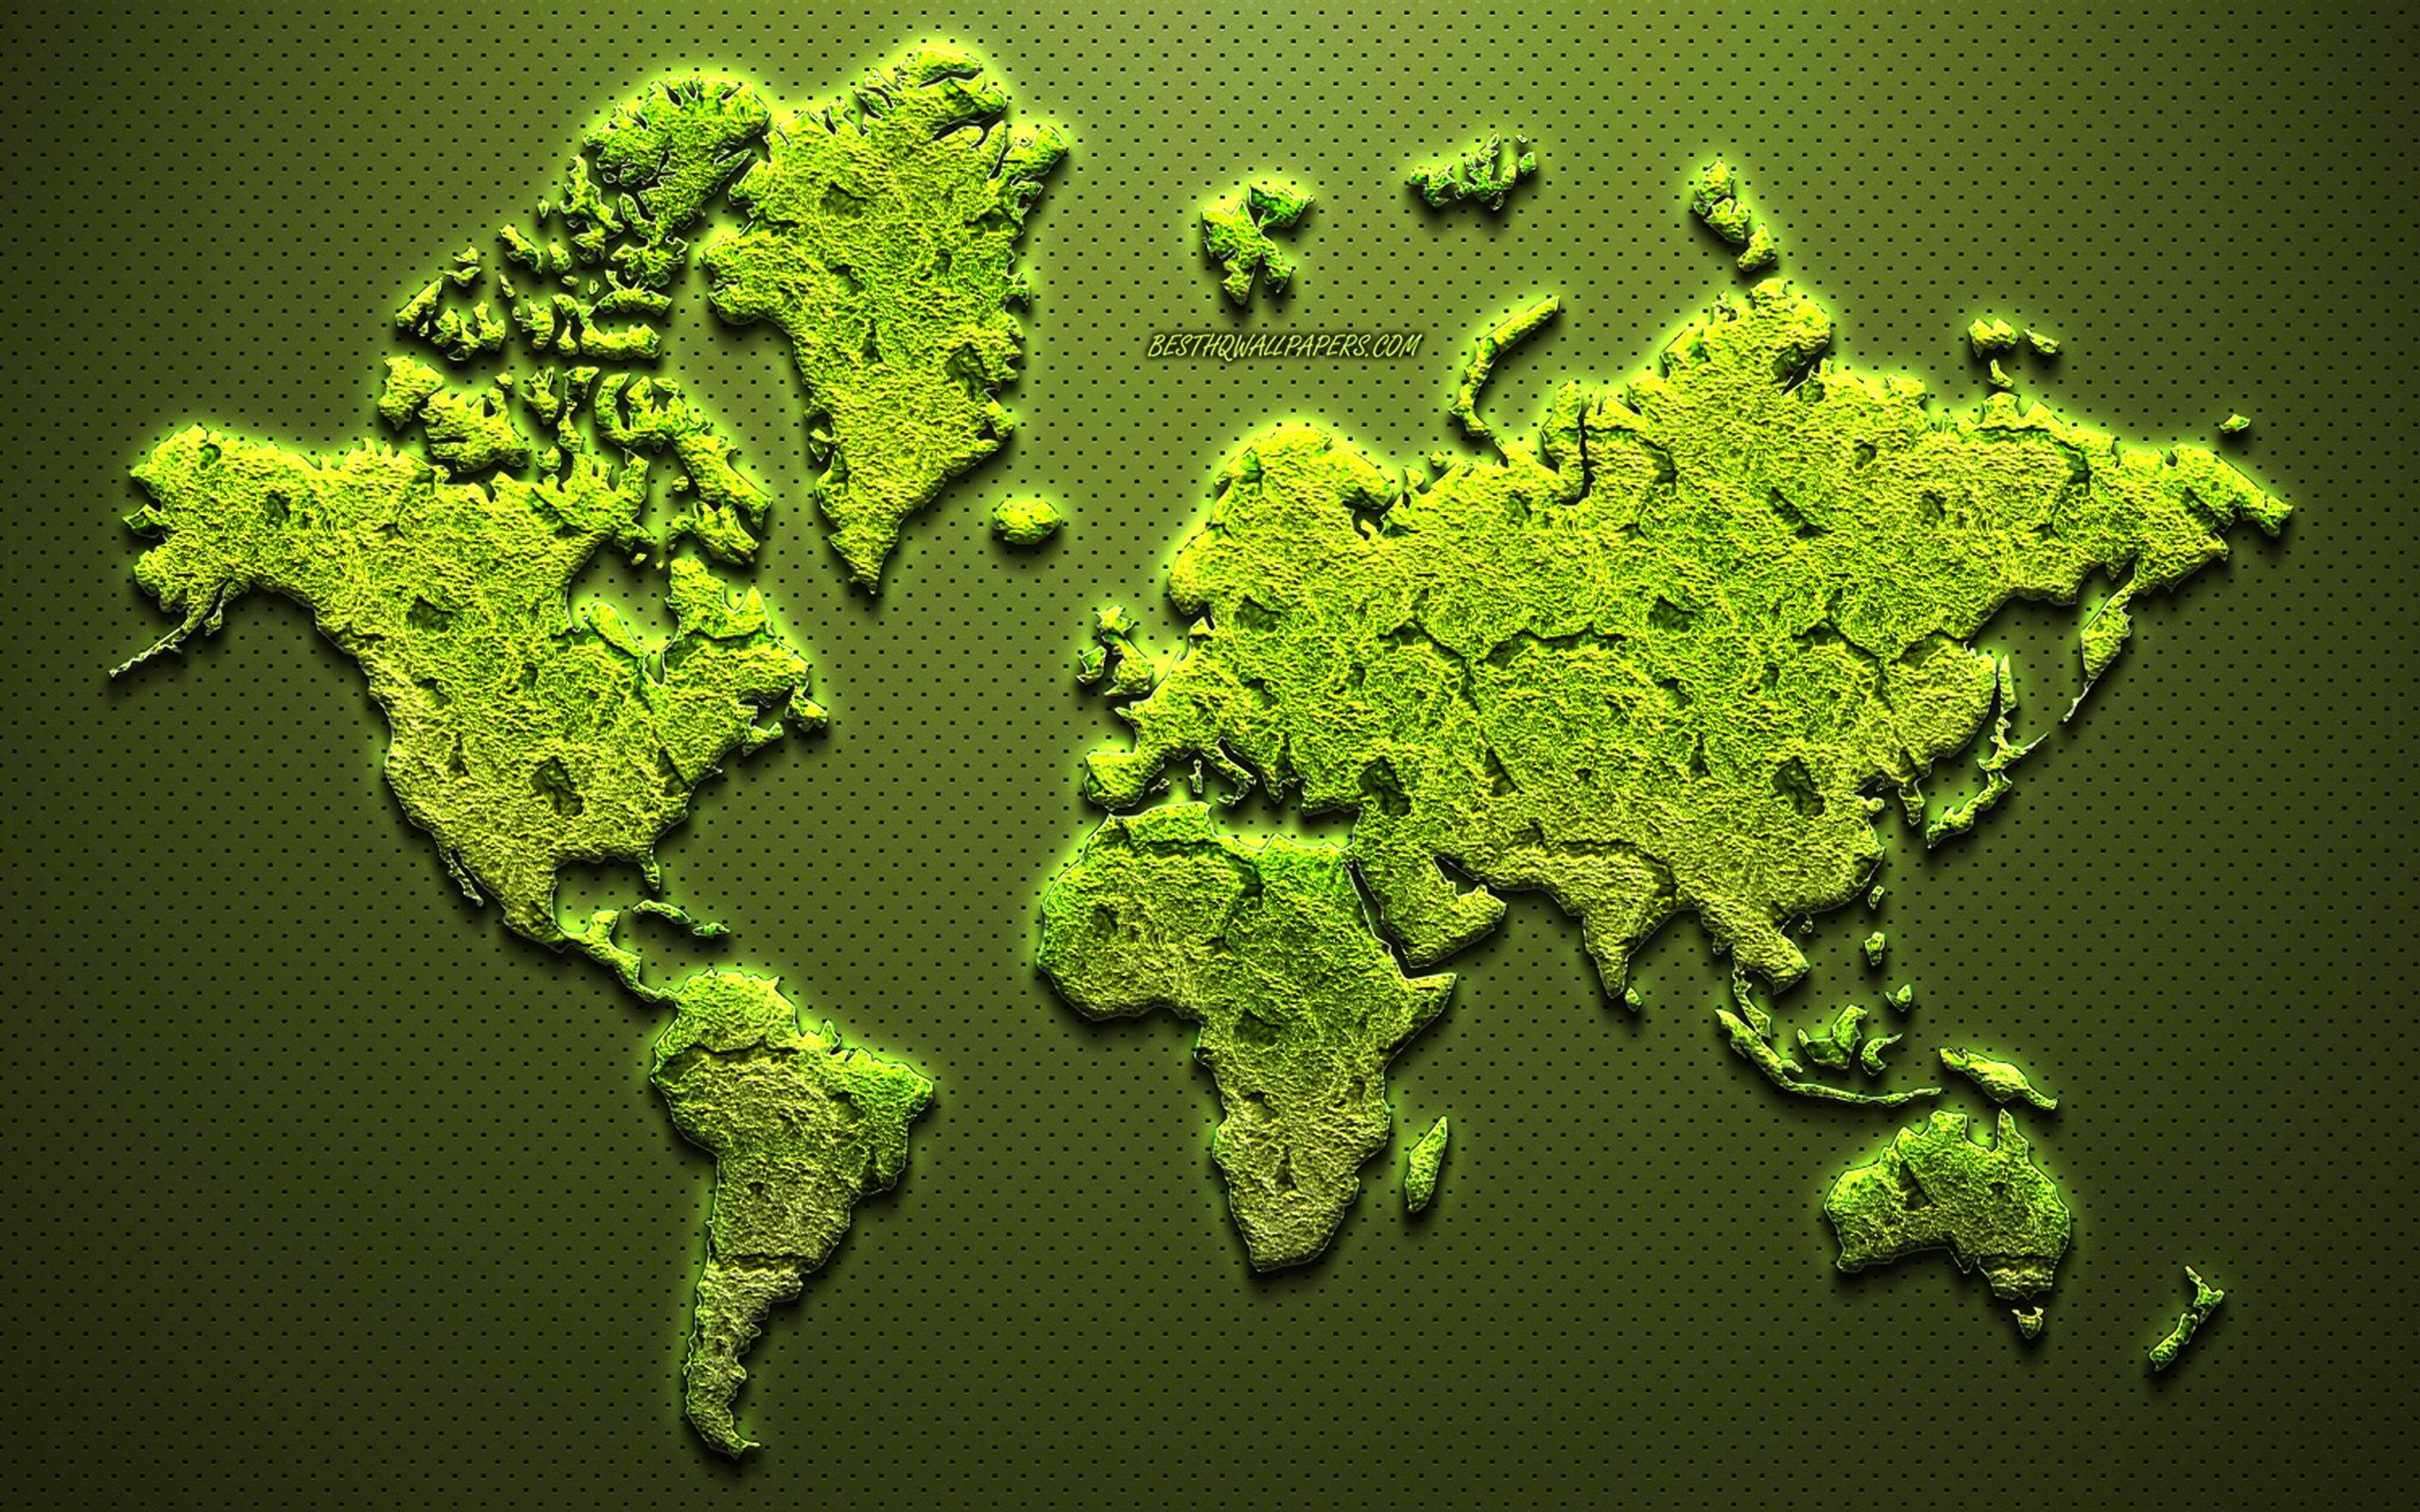 Download wallpaper Green creative world map, ecology concepts, floral world map, herbal map of the world, environment, art, world map concepts for desktop with resolution 2560x1600. High Quality HD picture wallpaper